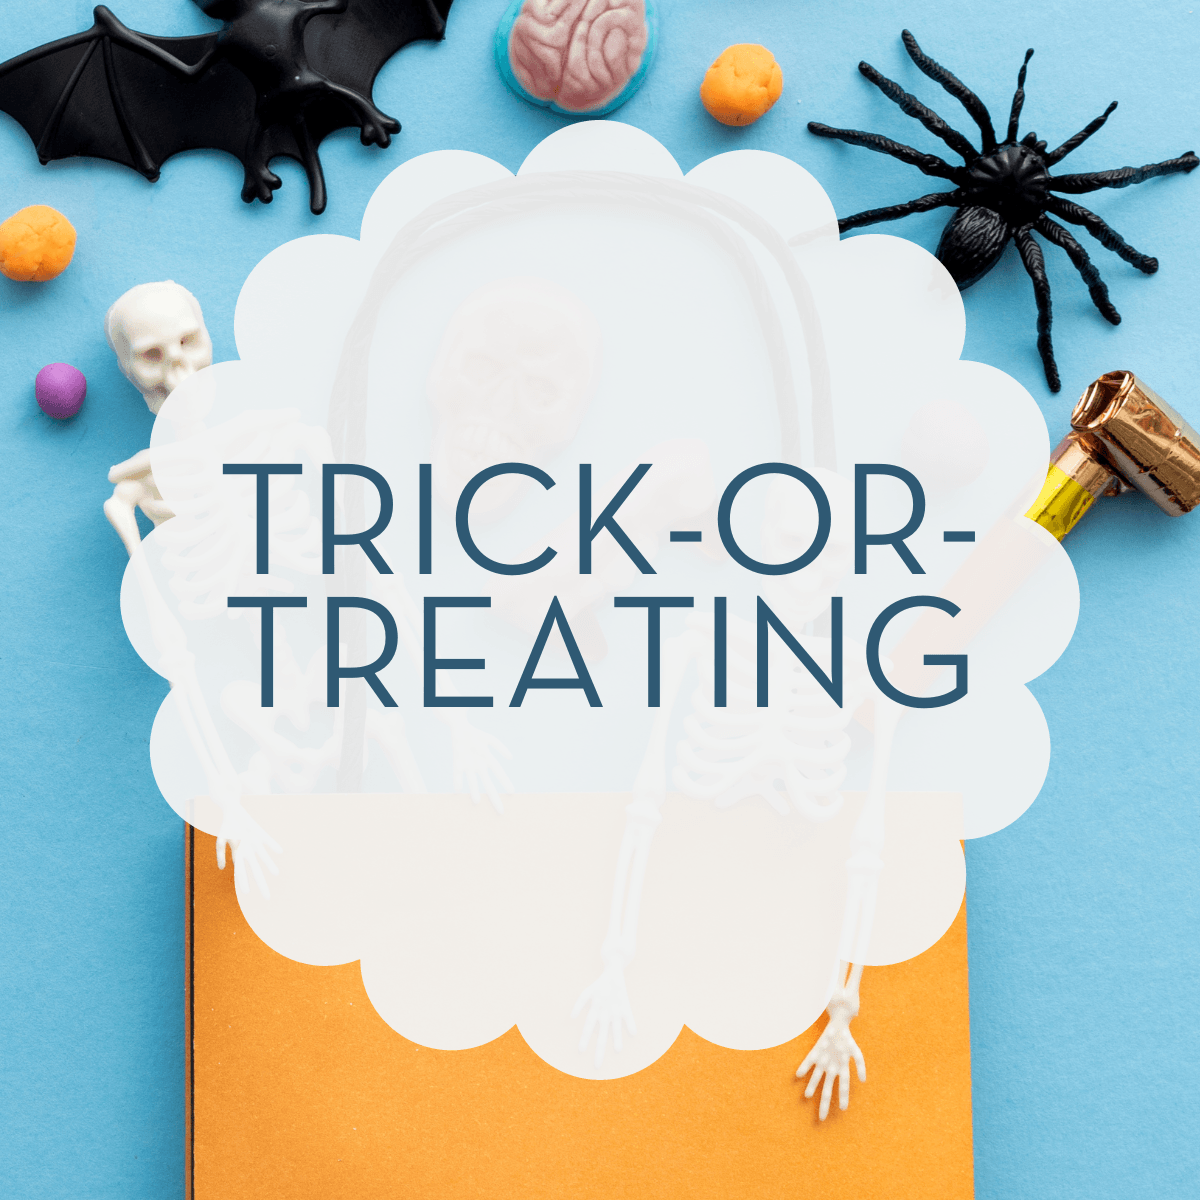 Guide to Trick-or-Treating in and Around Collin County